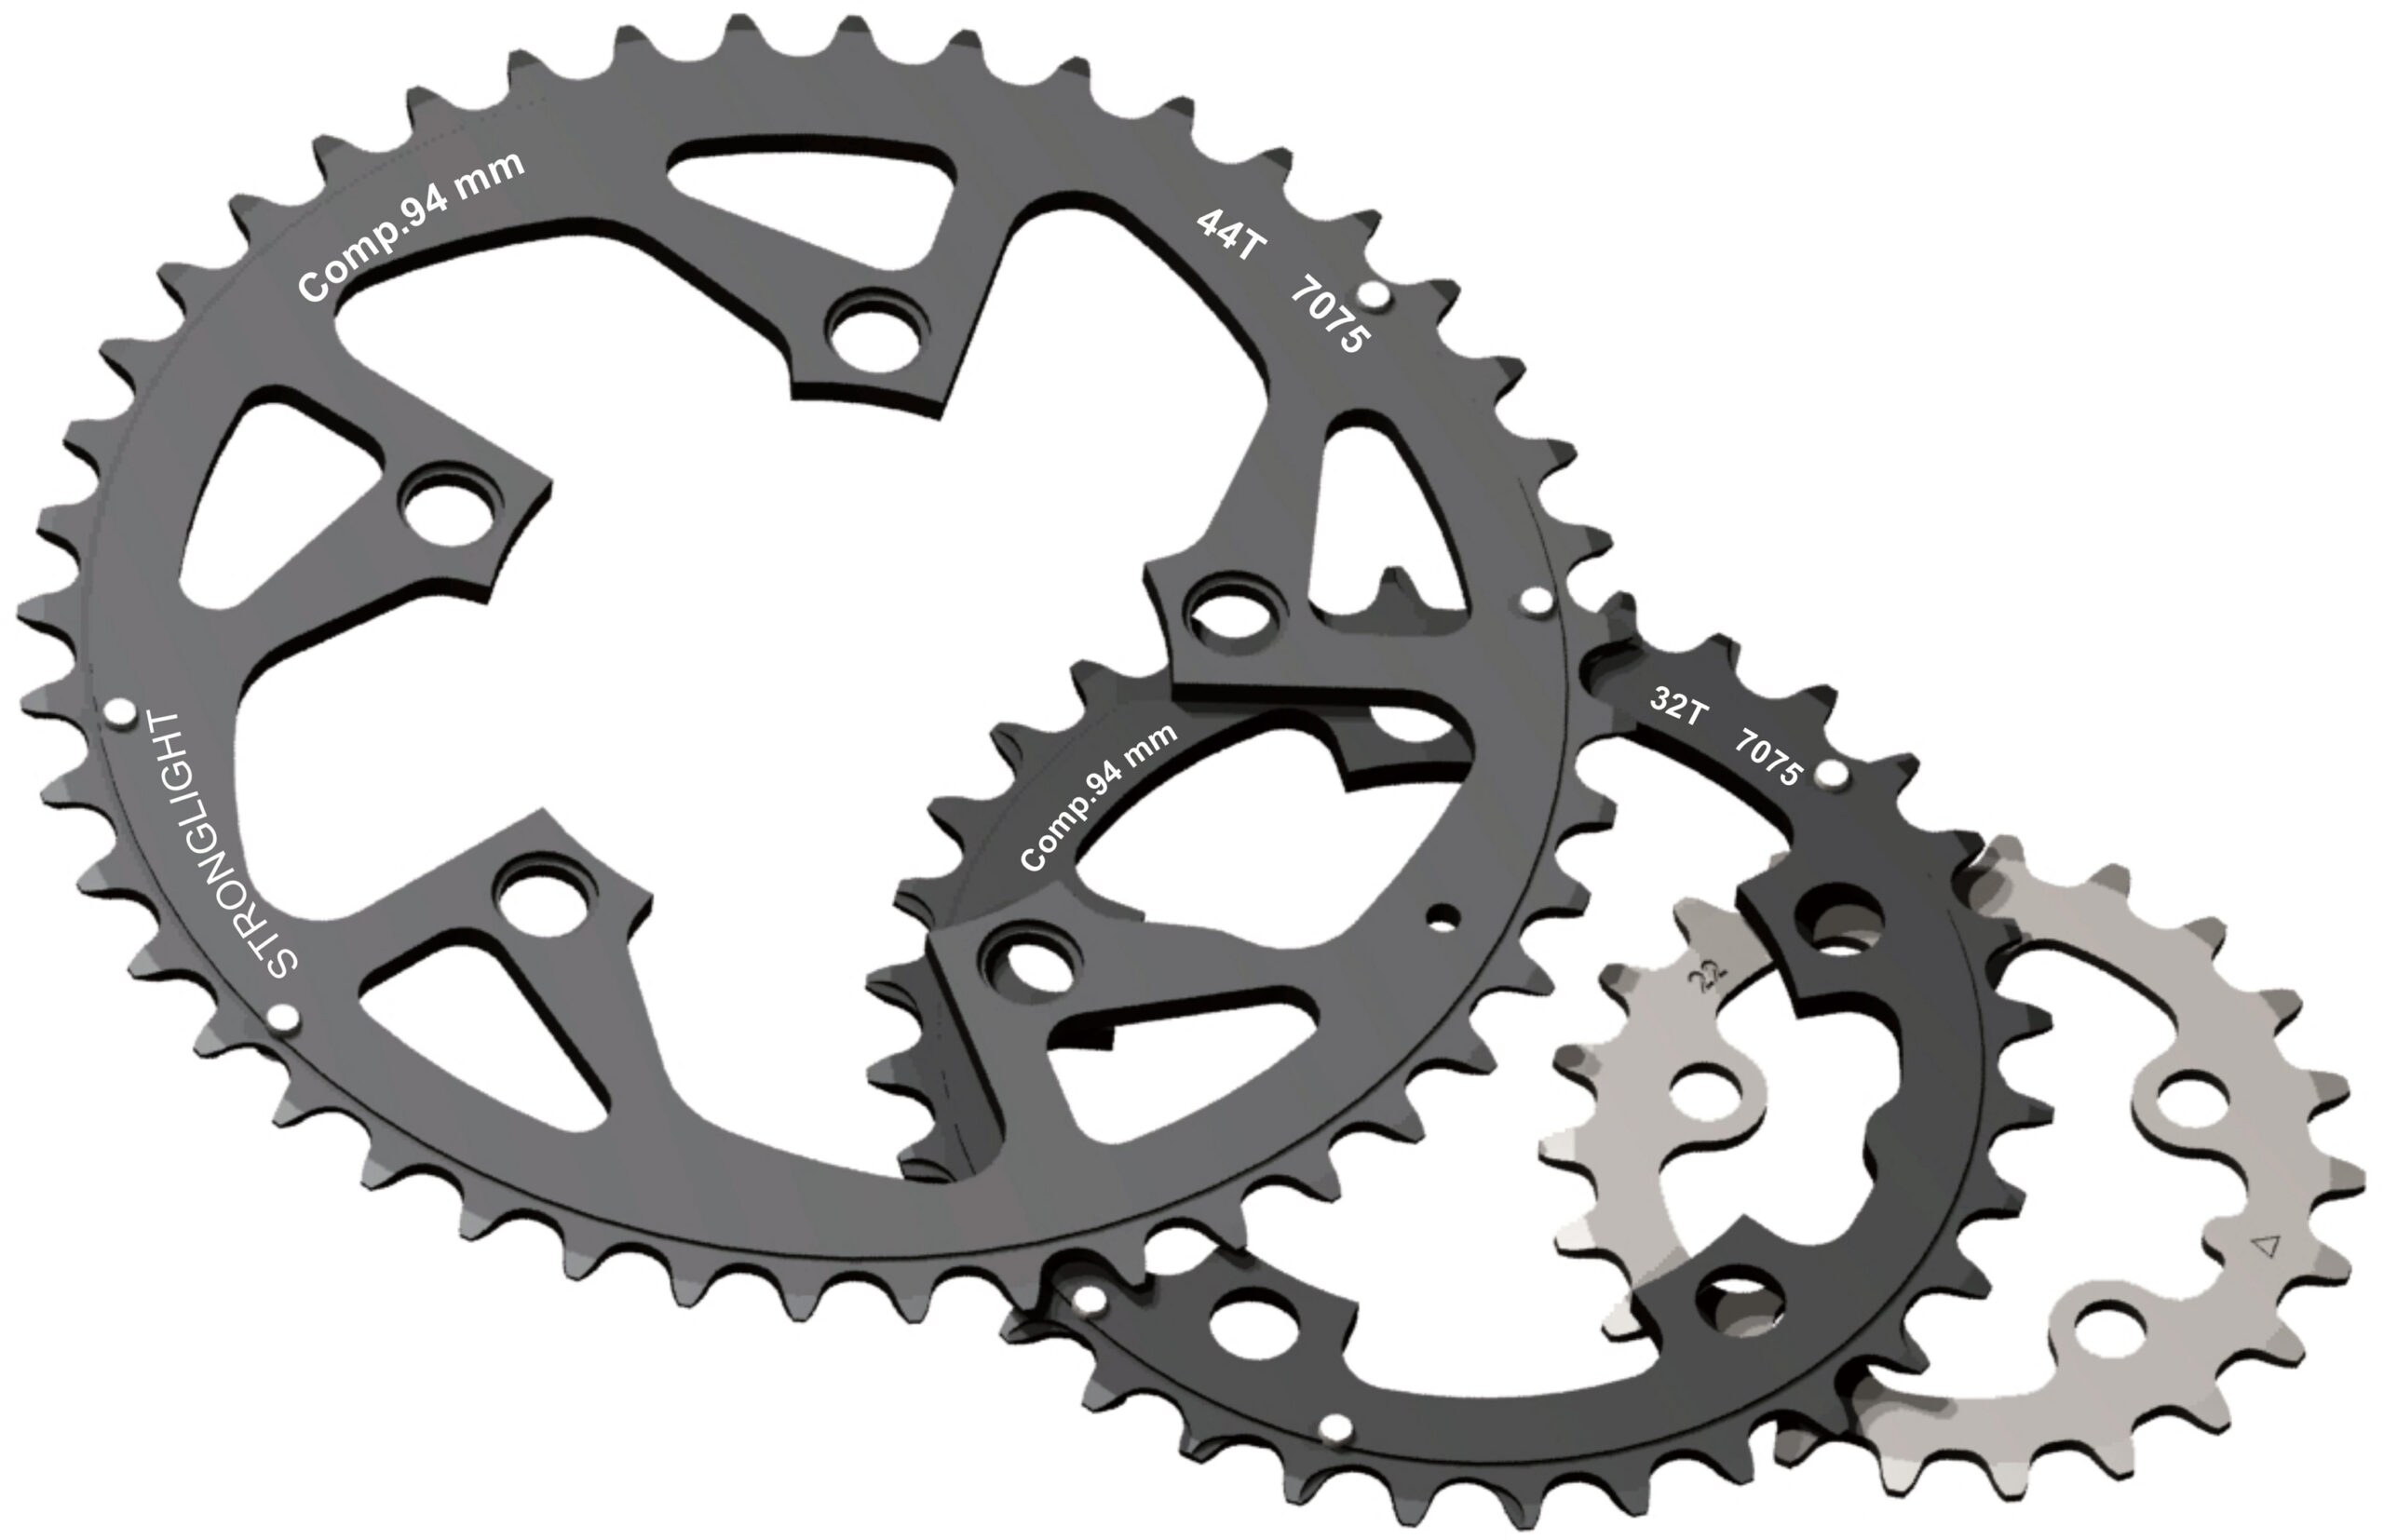 RZ09432Z Stronglight 32T With Pins 5-Arm/94mm Chainring